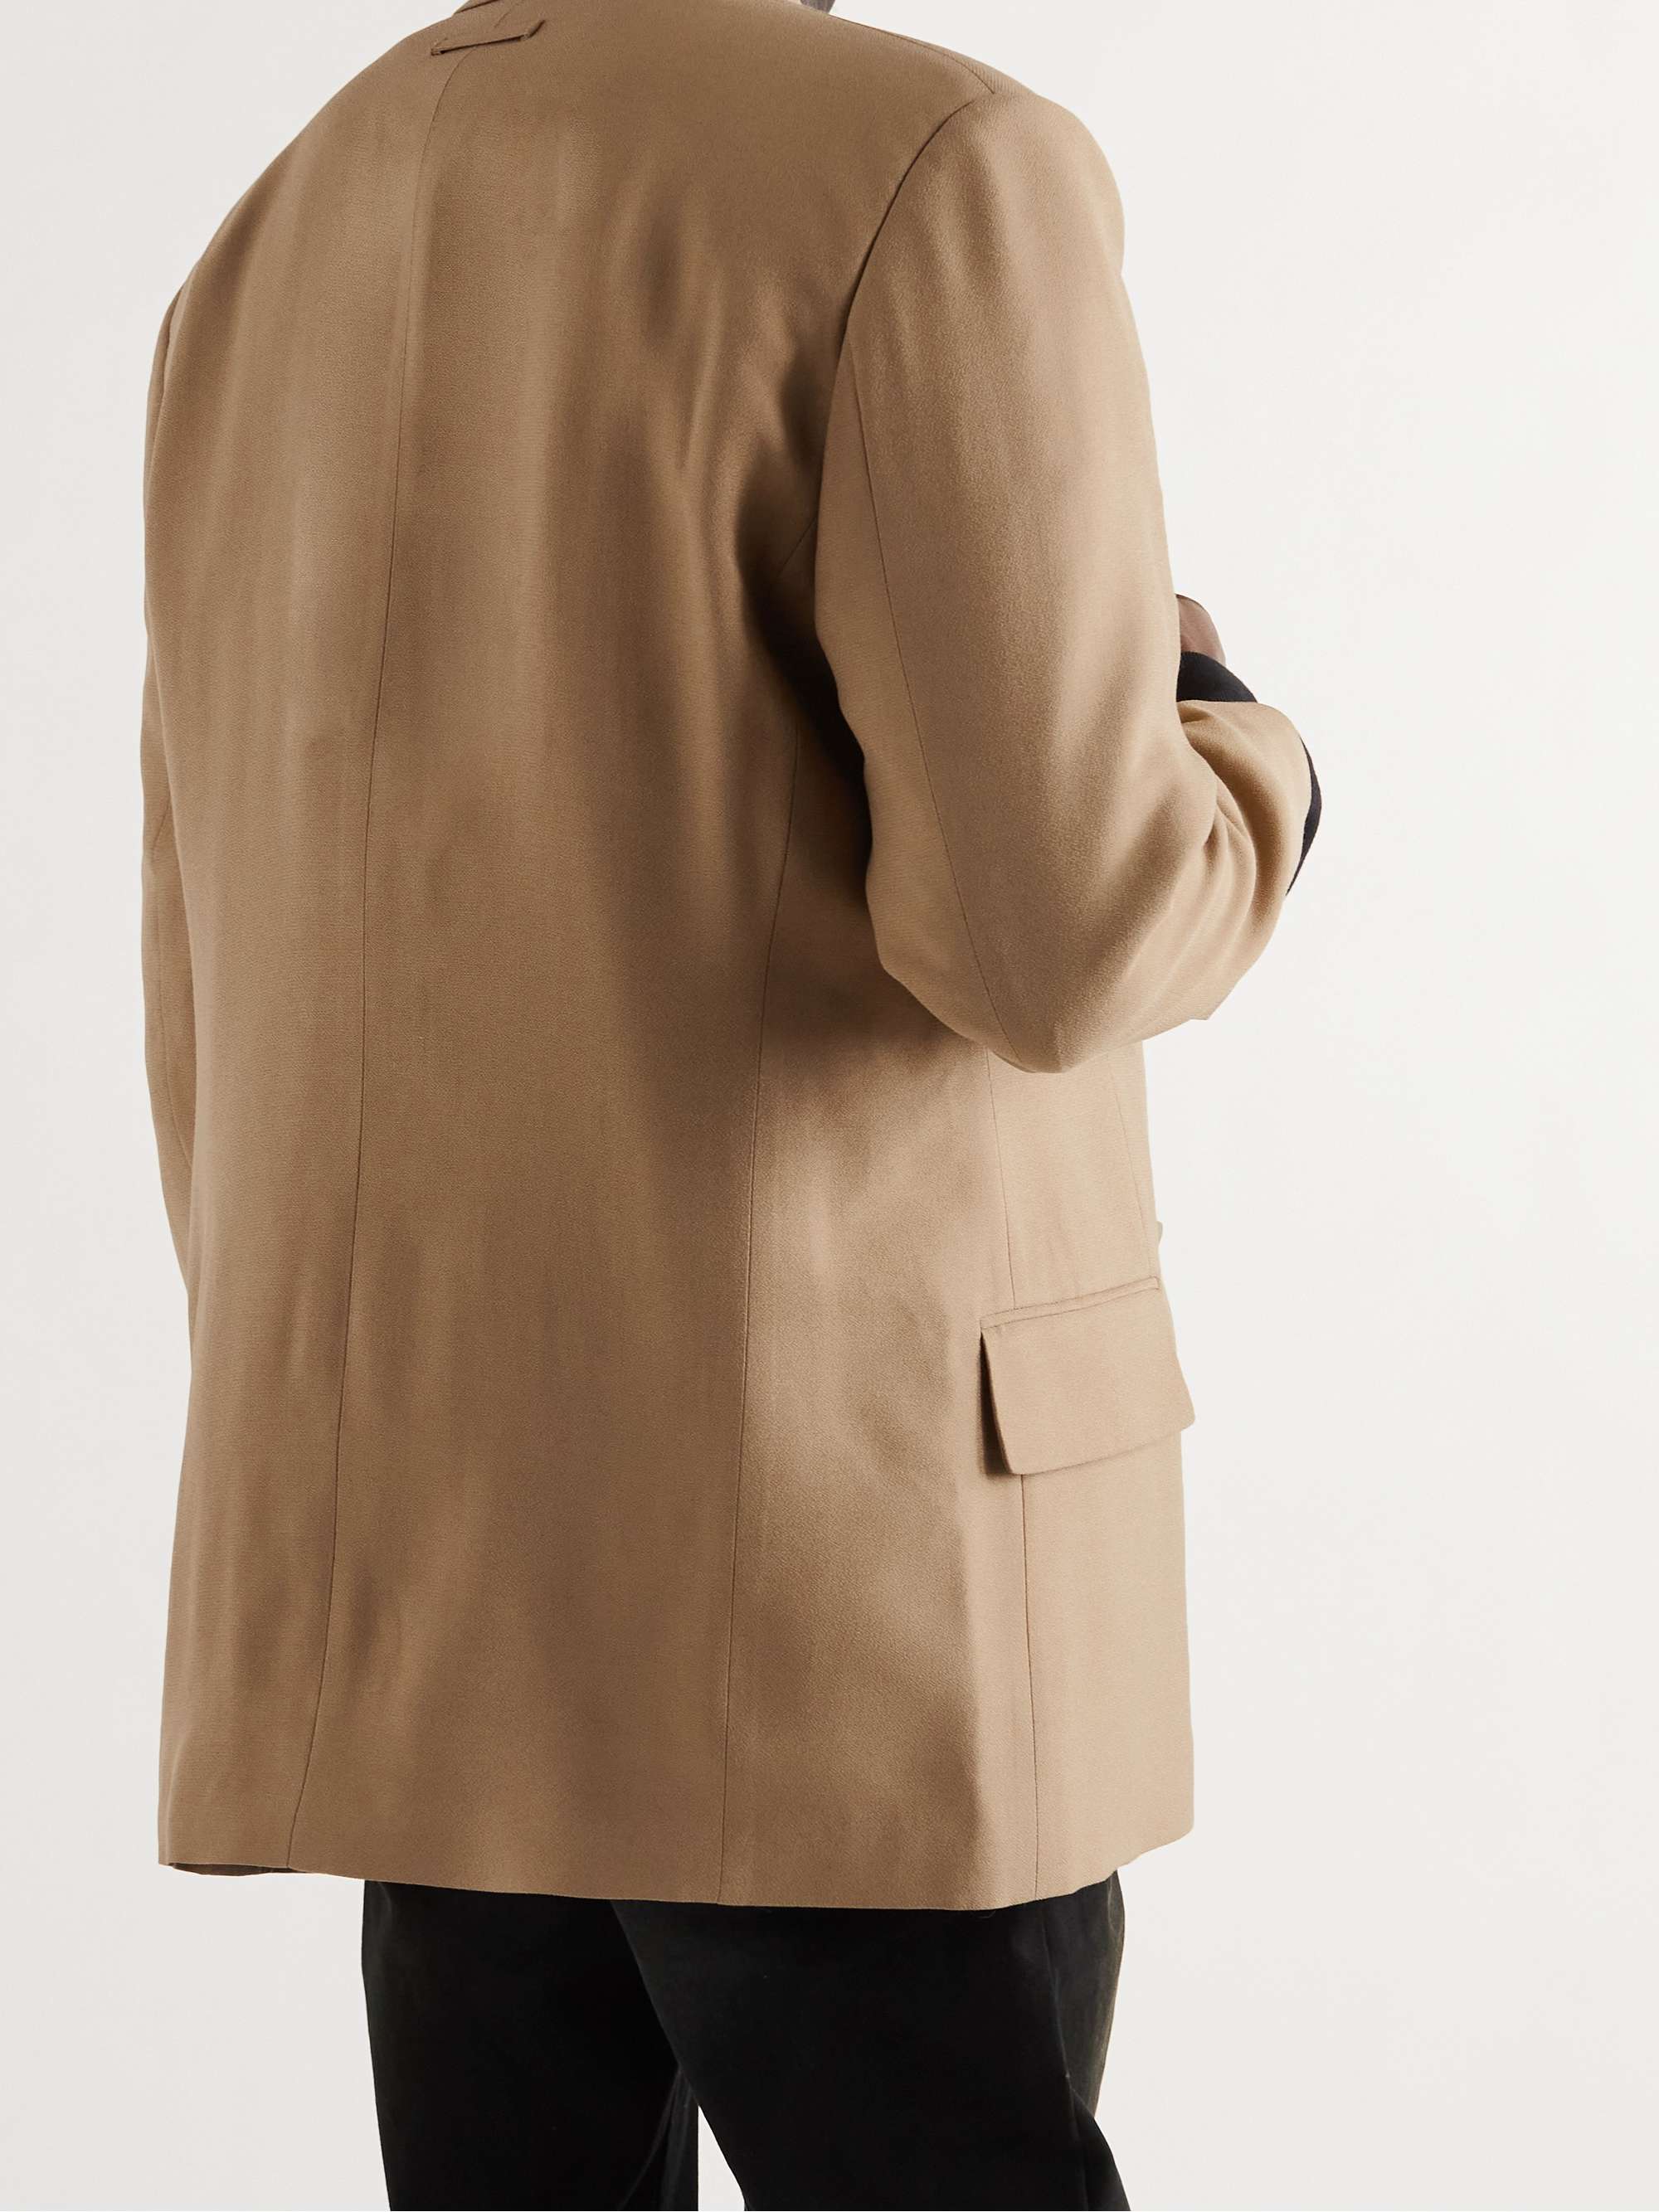 FEAR OF GOD California Double-Breasted Crepe Blazer